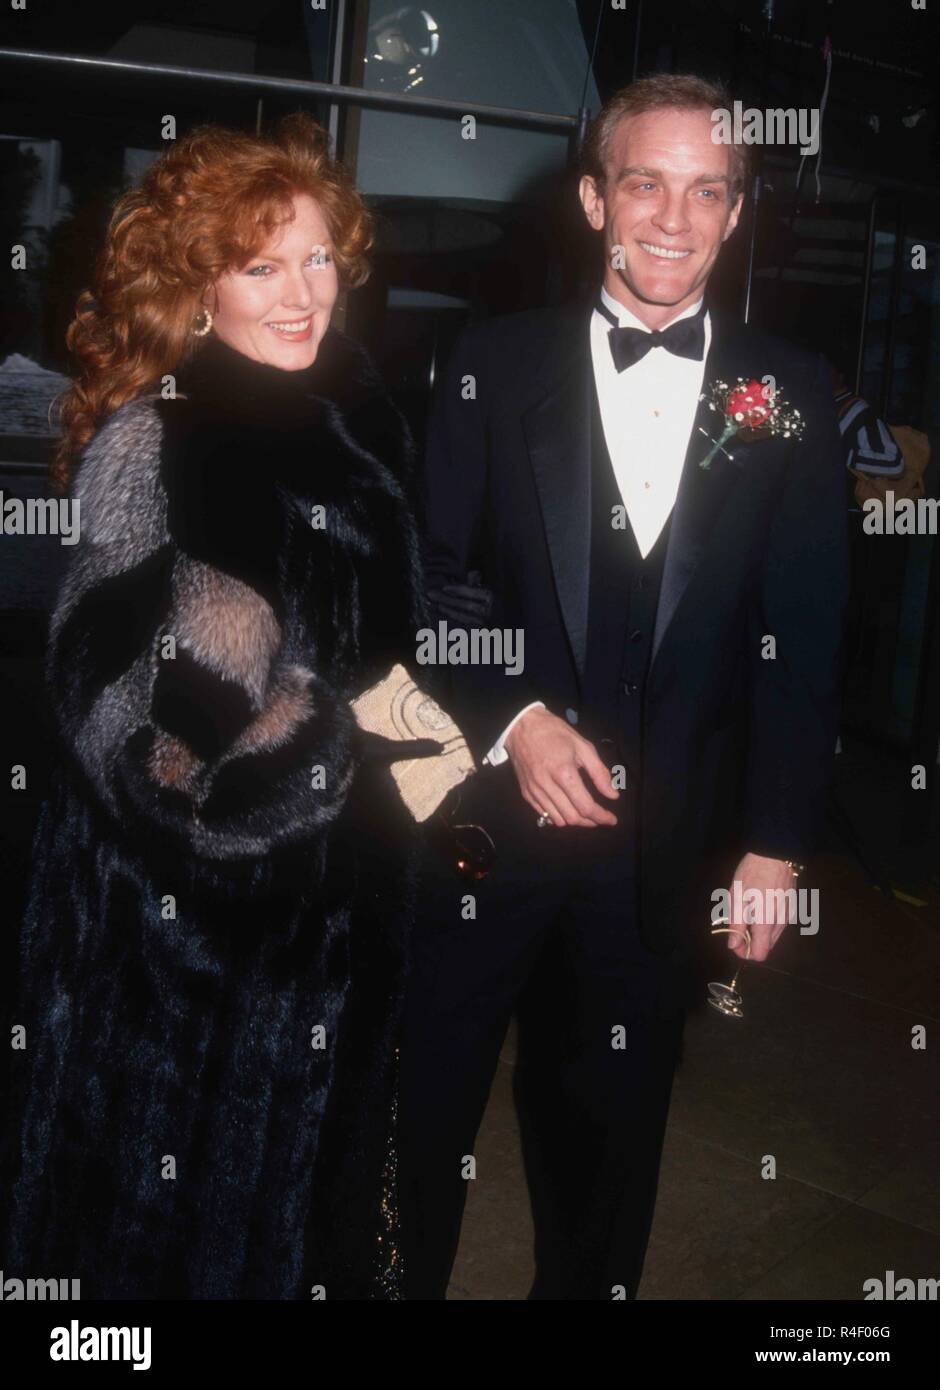 BEVERLY HILLS, CA - FEBRUARY 26: Actor Terry Lester attends the Ninth Annual Soap Opera Digest Awards on February 26, 1993 at the Beverly Hilton Hotel in Beverly Hills, California. Photo by Barry King/Alamy Stock Photo Stock Photo